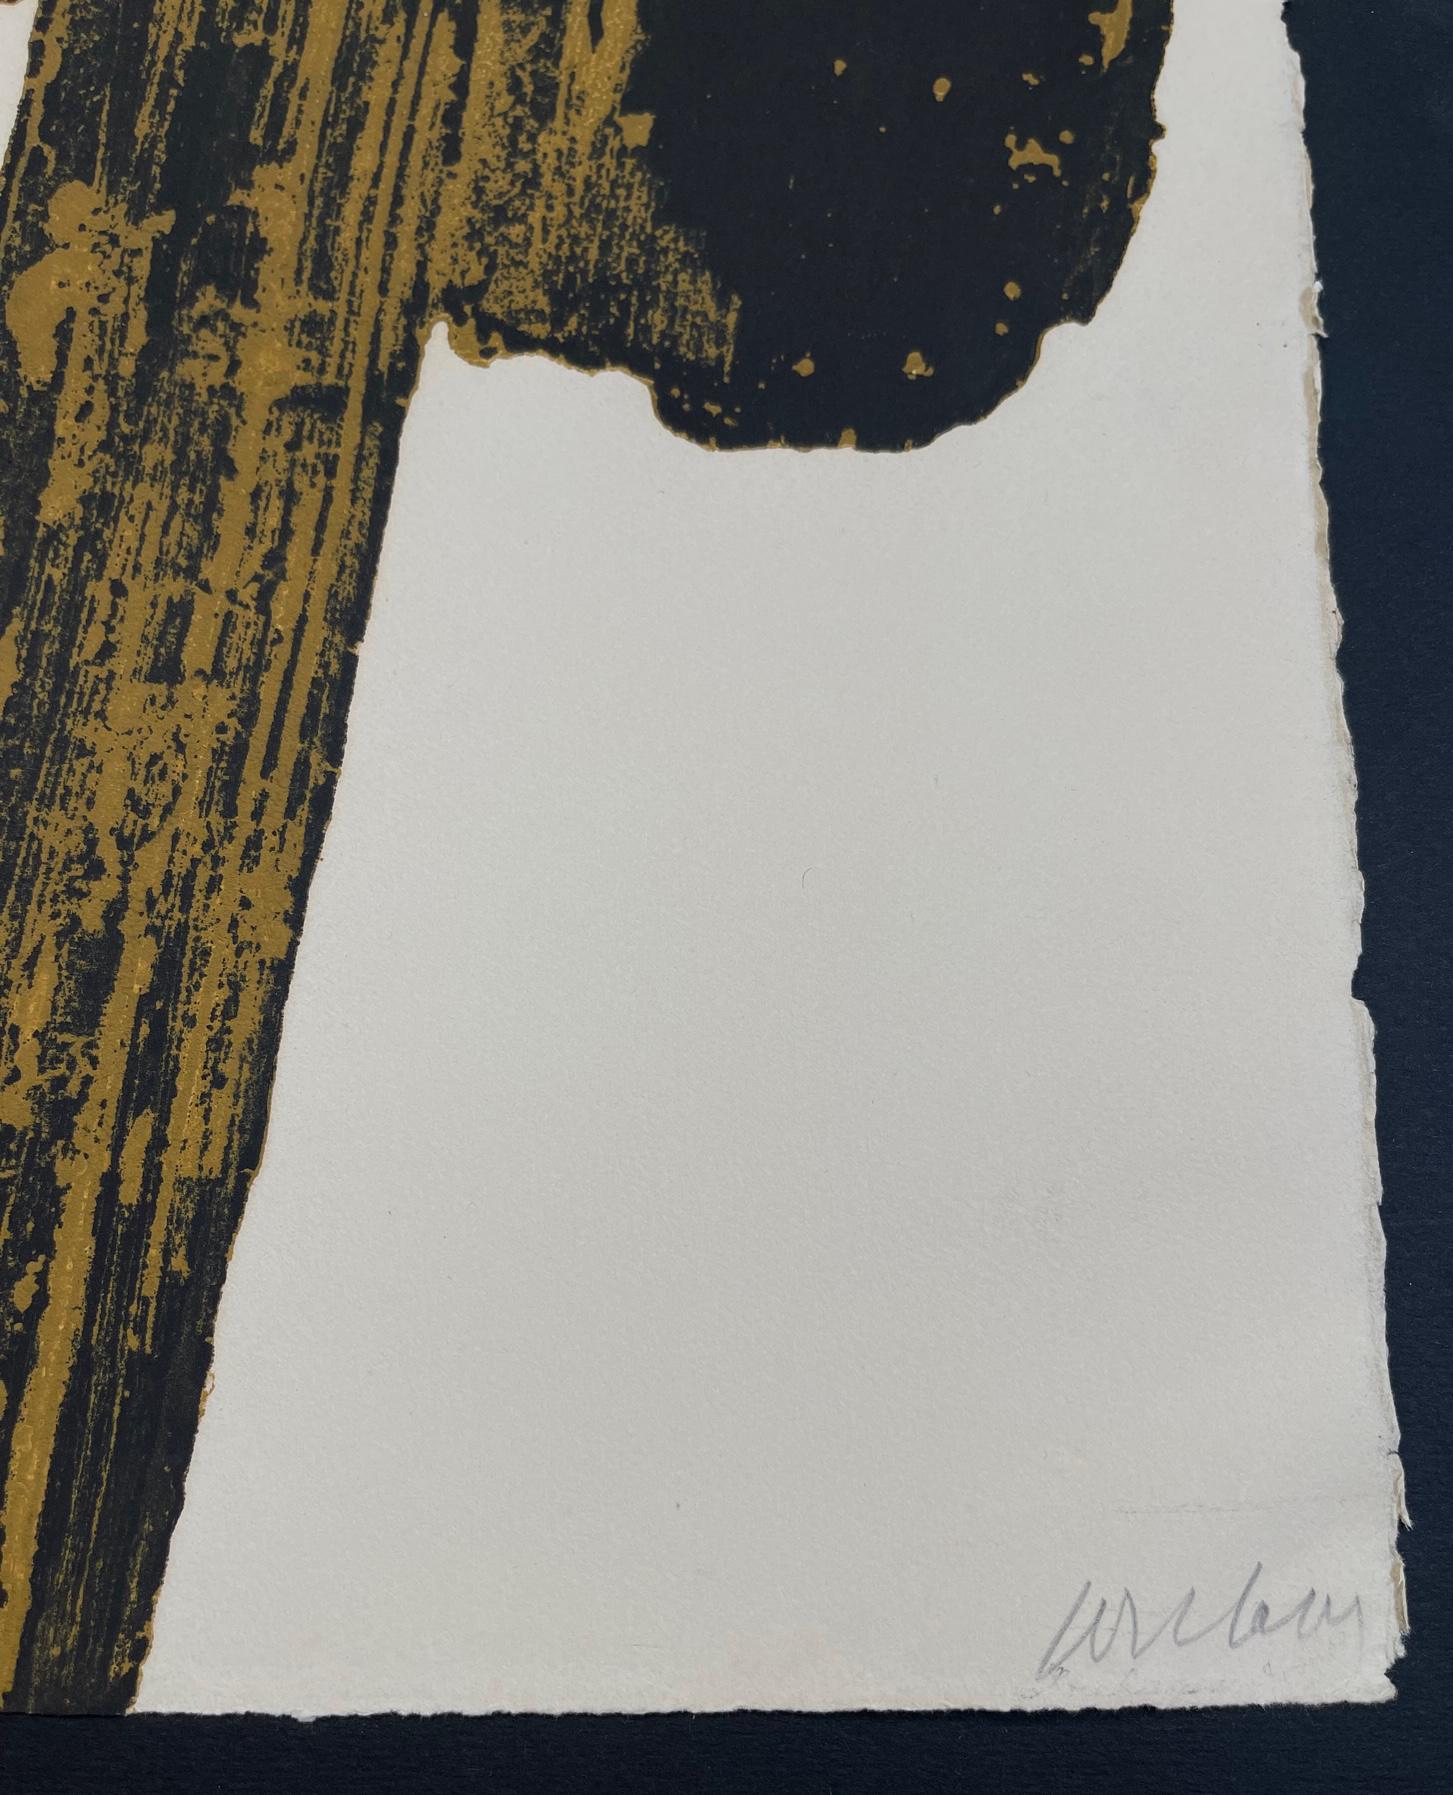 Eau Forte XVIII, 1962, Etching, Limited Edition of 100 by Pierre Soulages -BNF19 For Sale 1